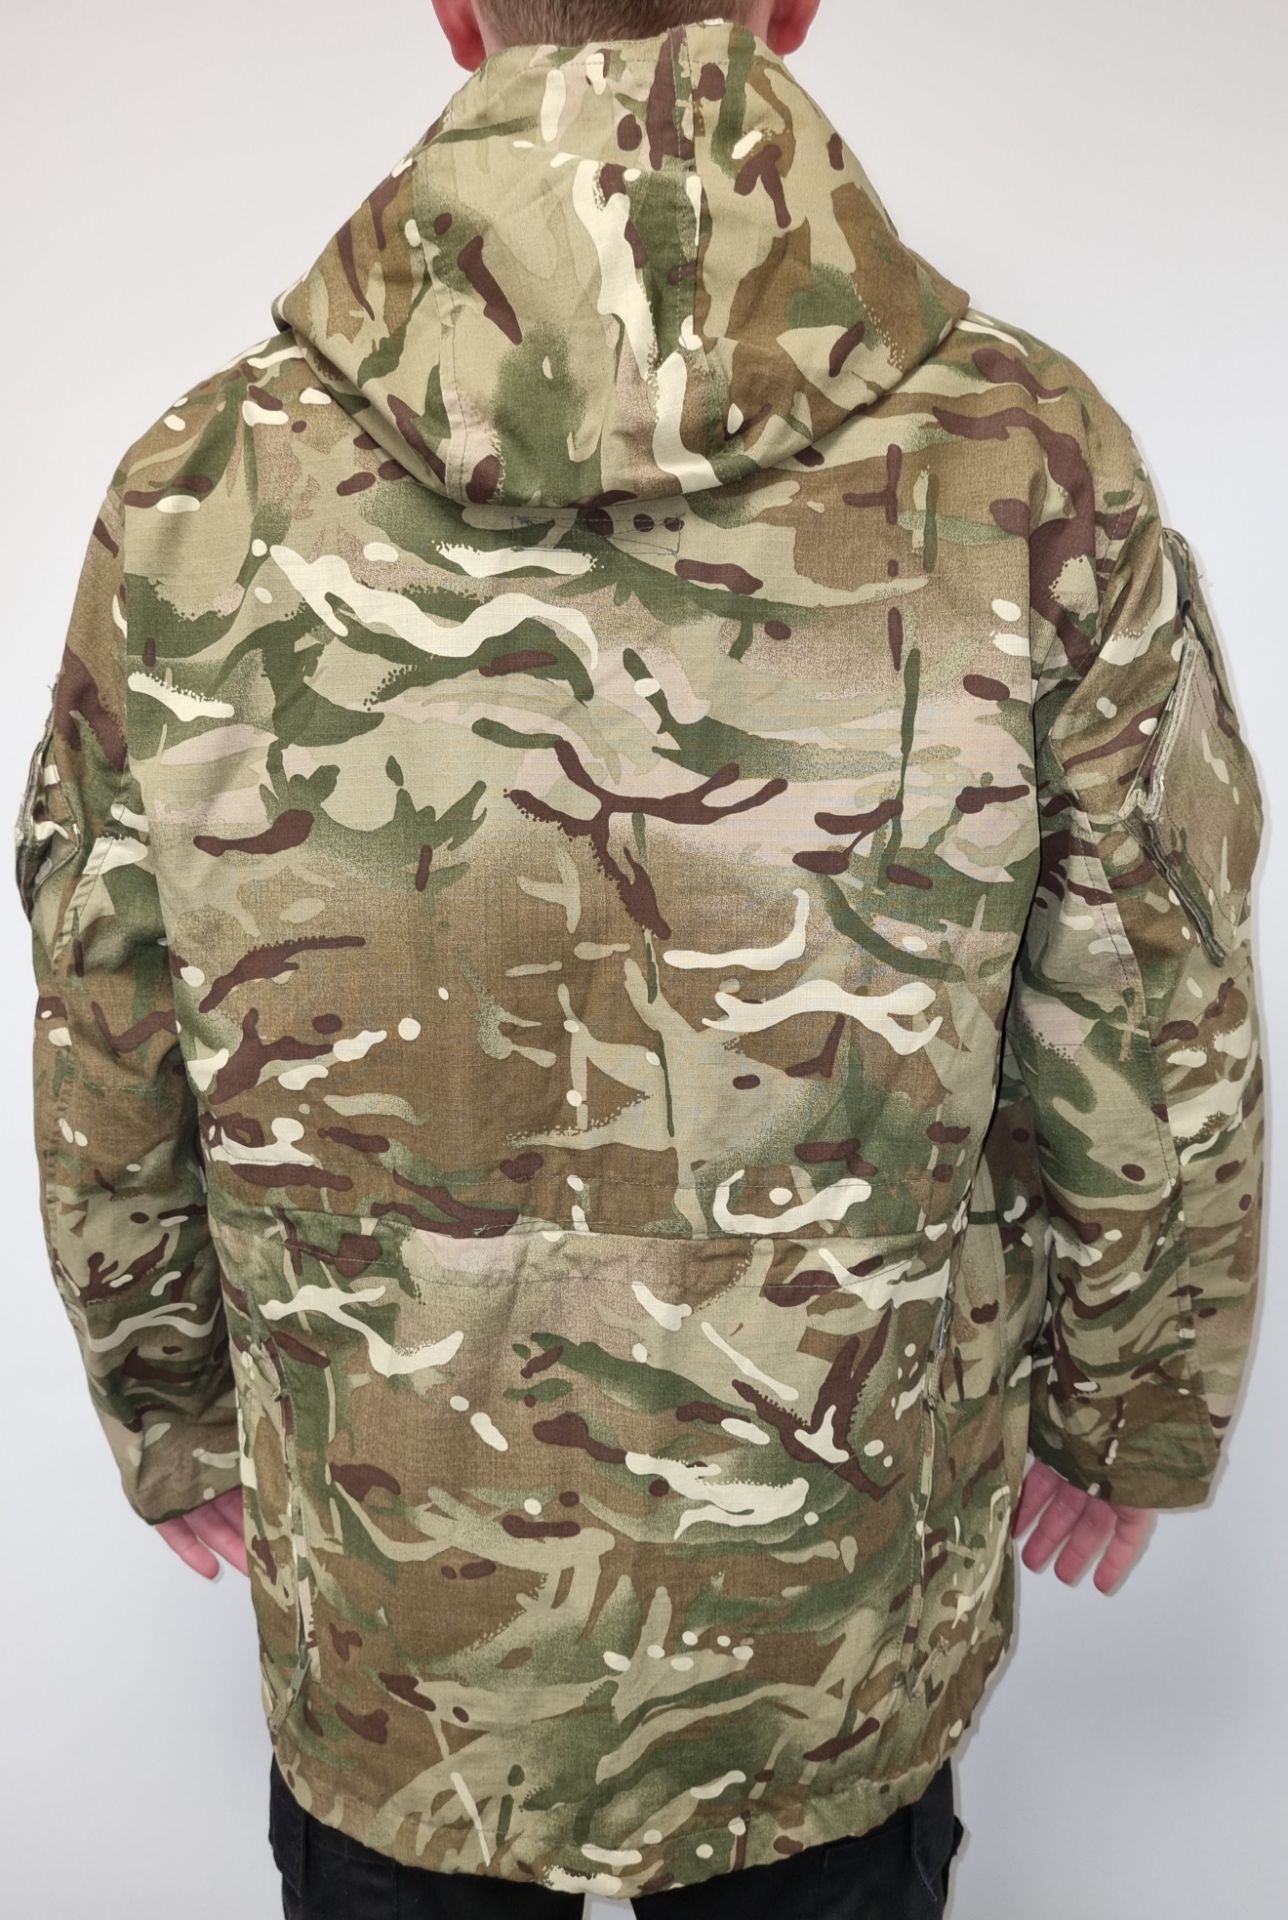 25x British Army MTP windproof smocks - mixed grades and sizes - Image 4 of 10